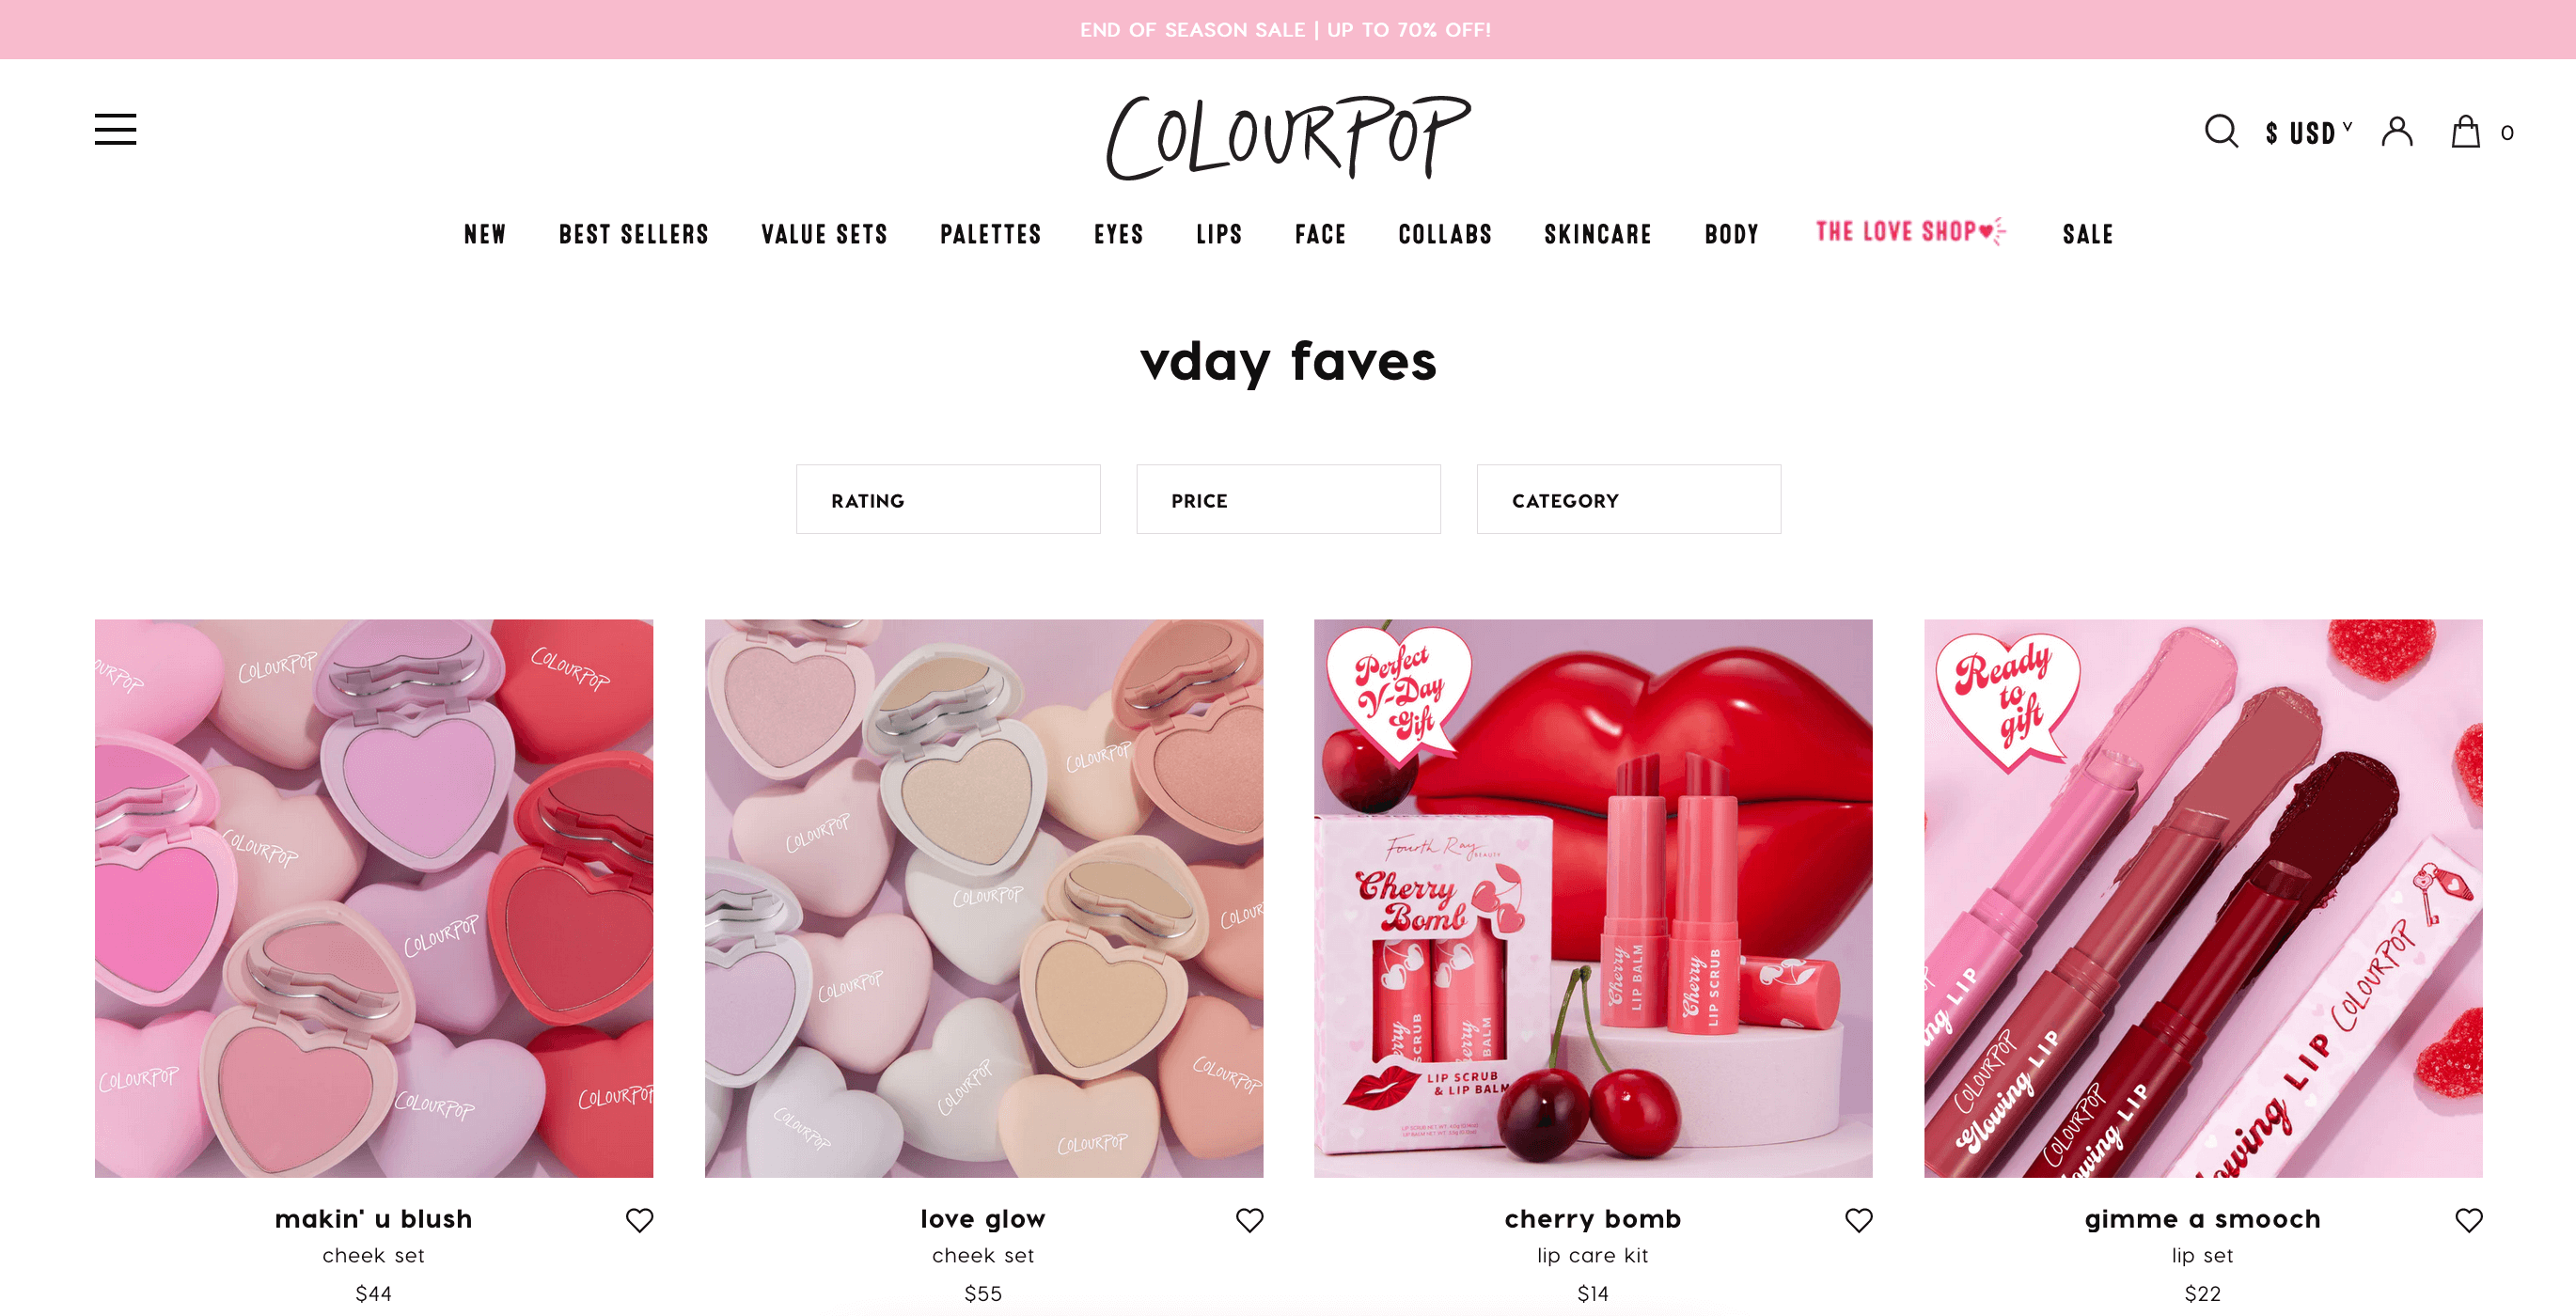 The Valentine’s Day section on ColourPop’s website with a selection of themed products